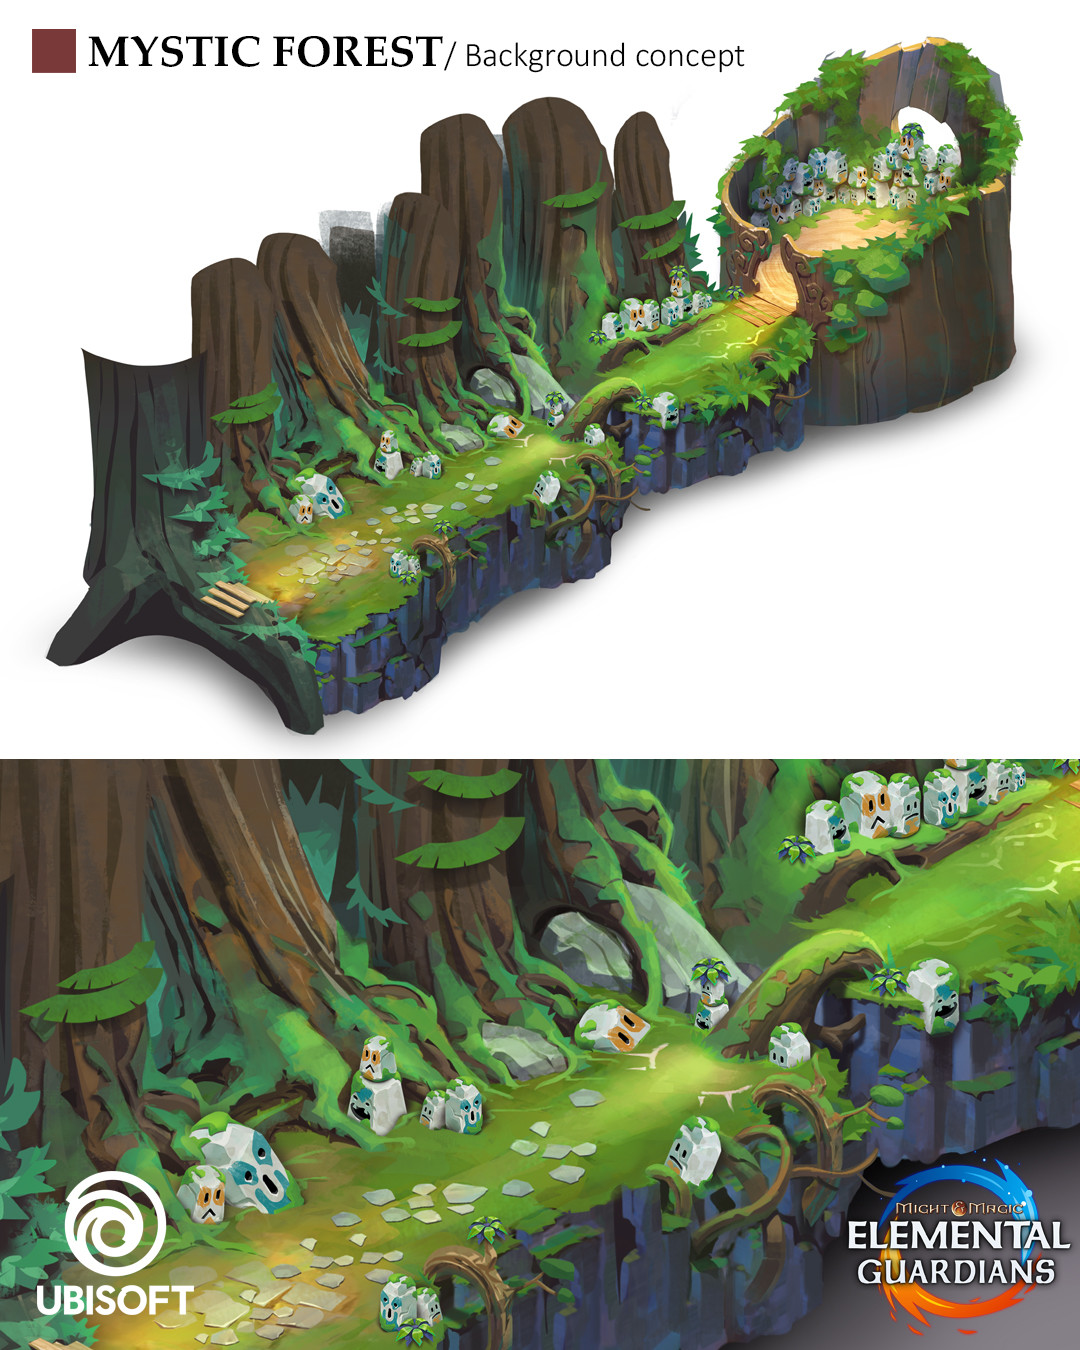 Mystic Forest
(background concept for Might &amp; Magic Elemental Guardians)